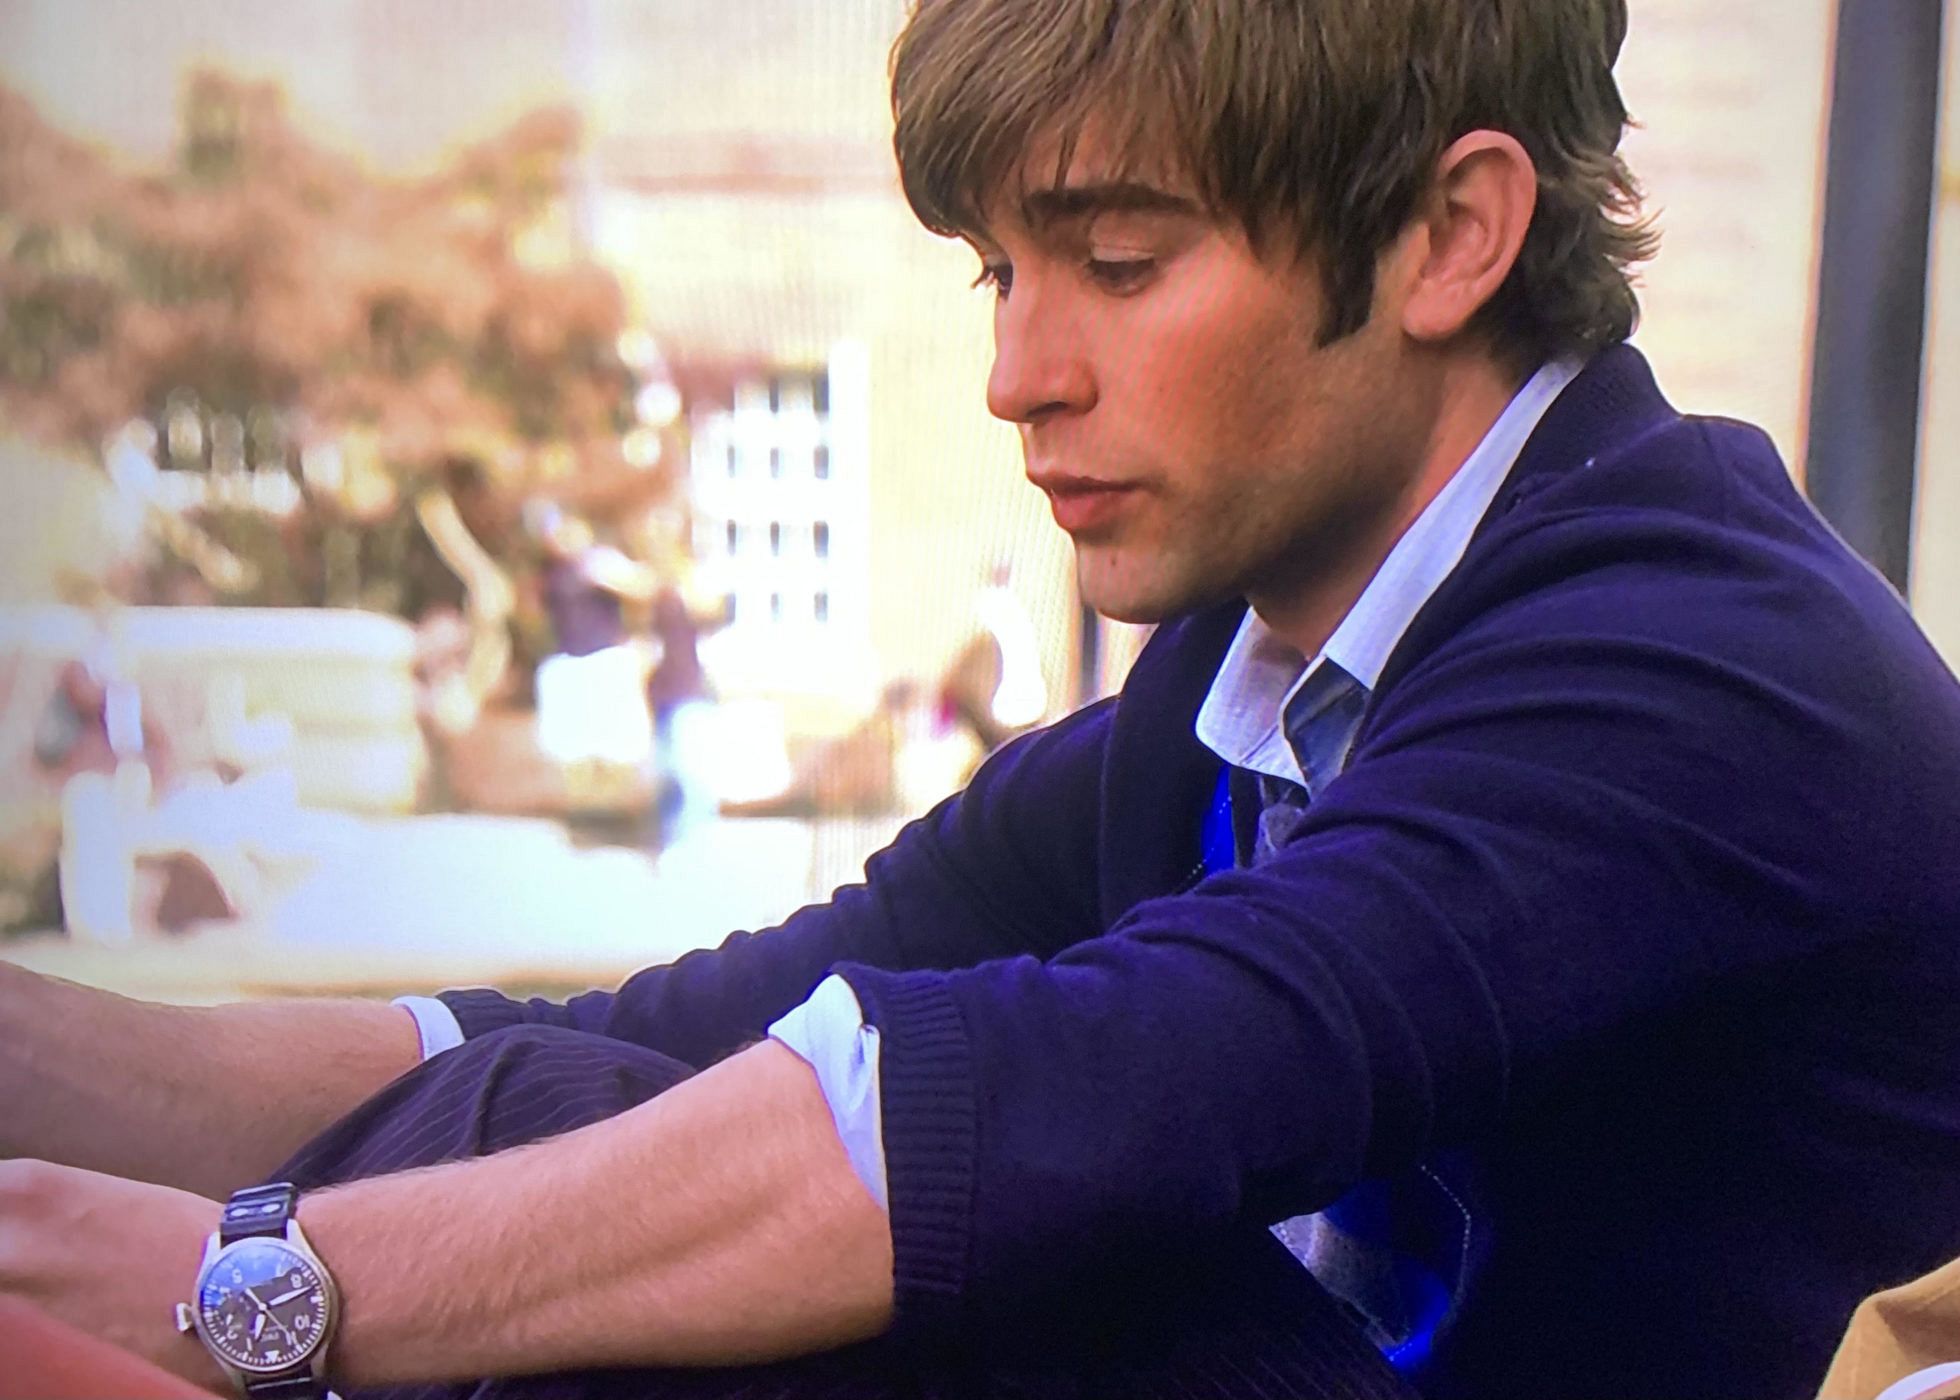 The IWC watch that had a starring role in Gossip Girl